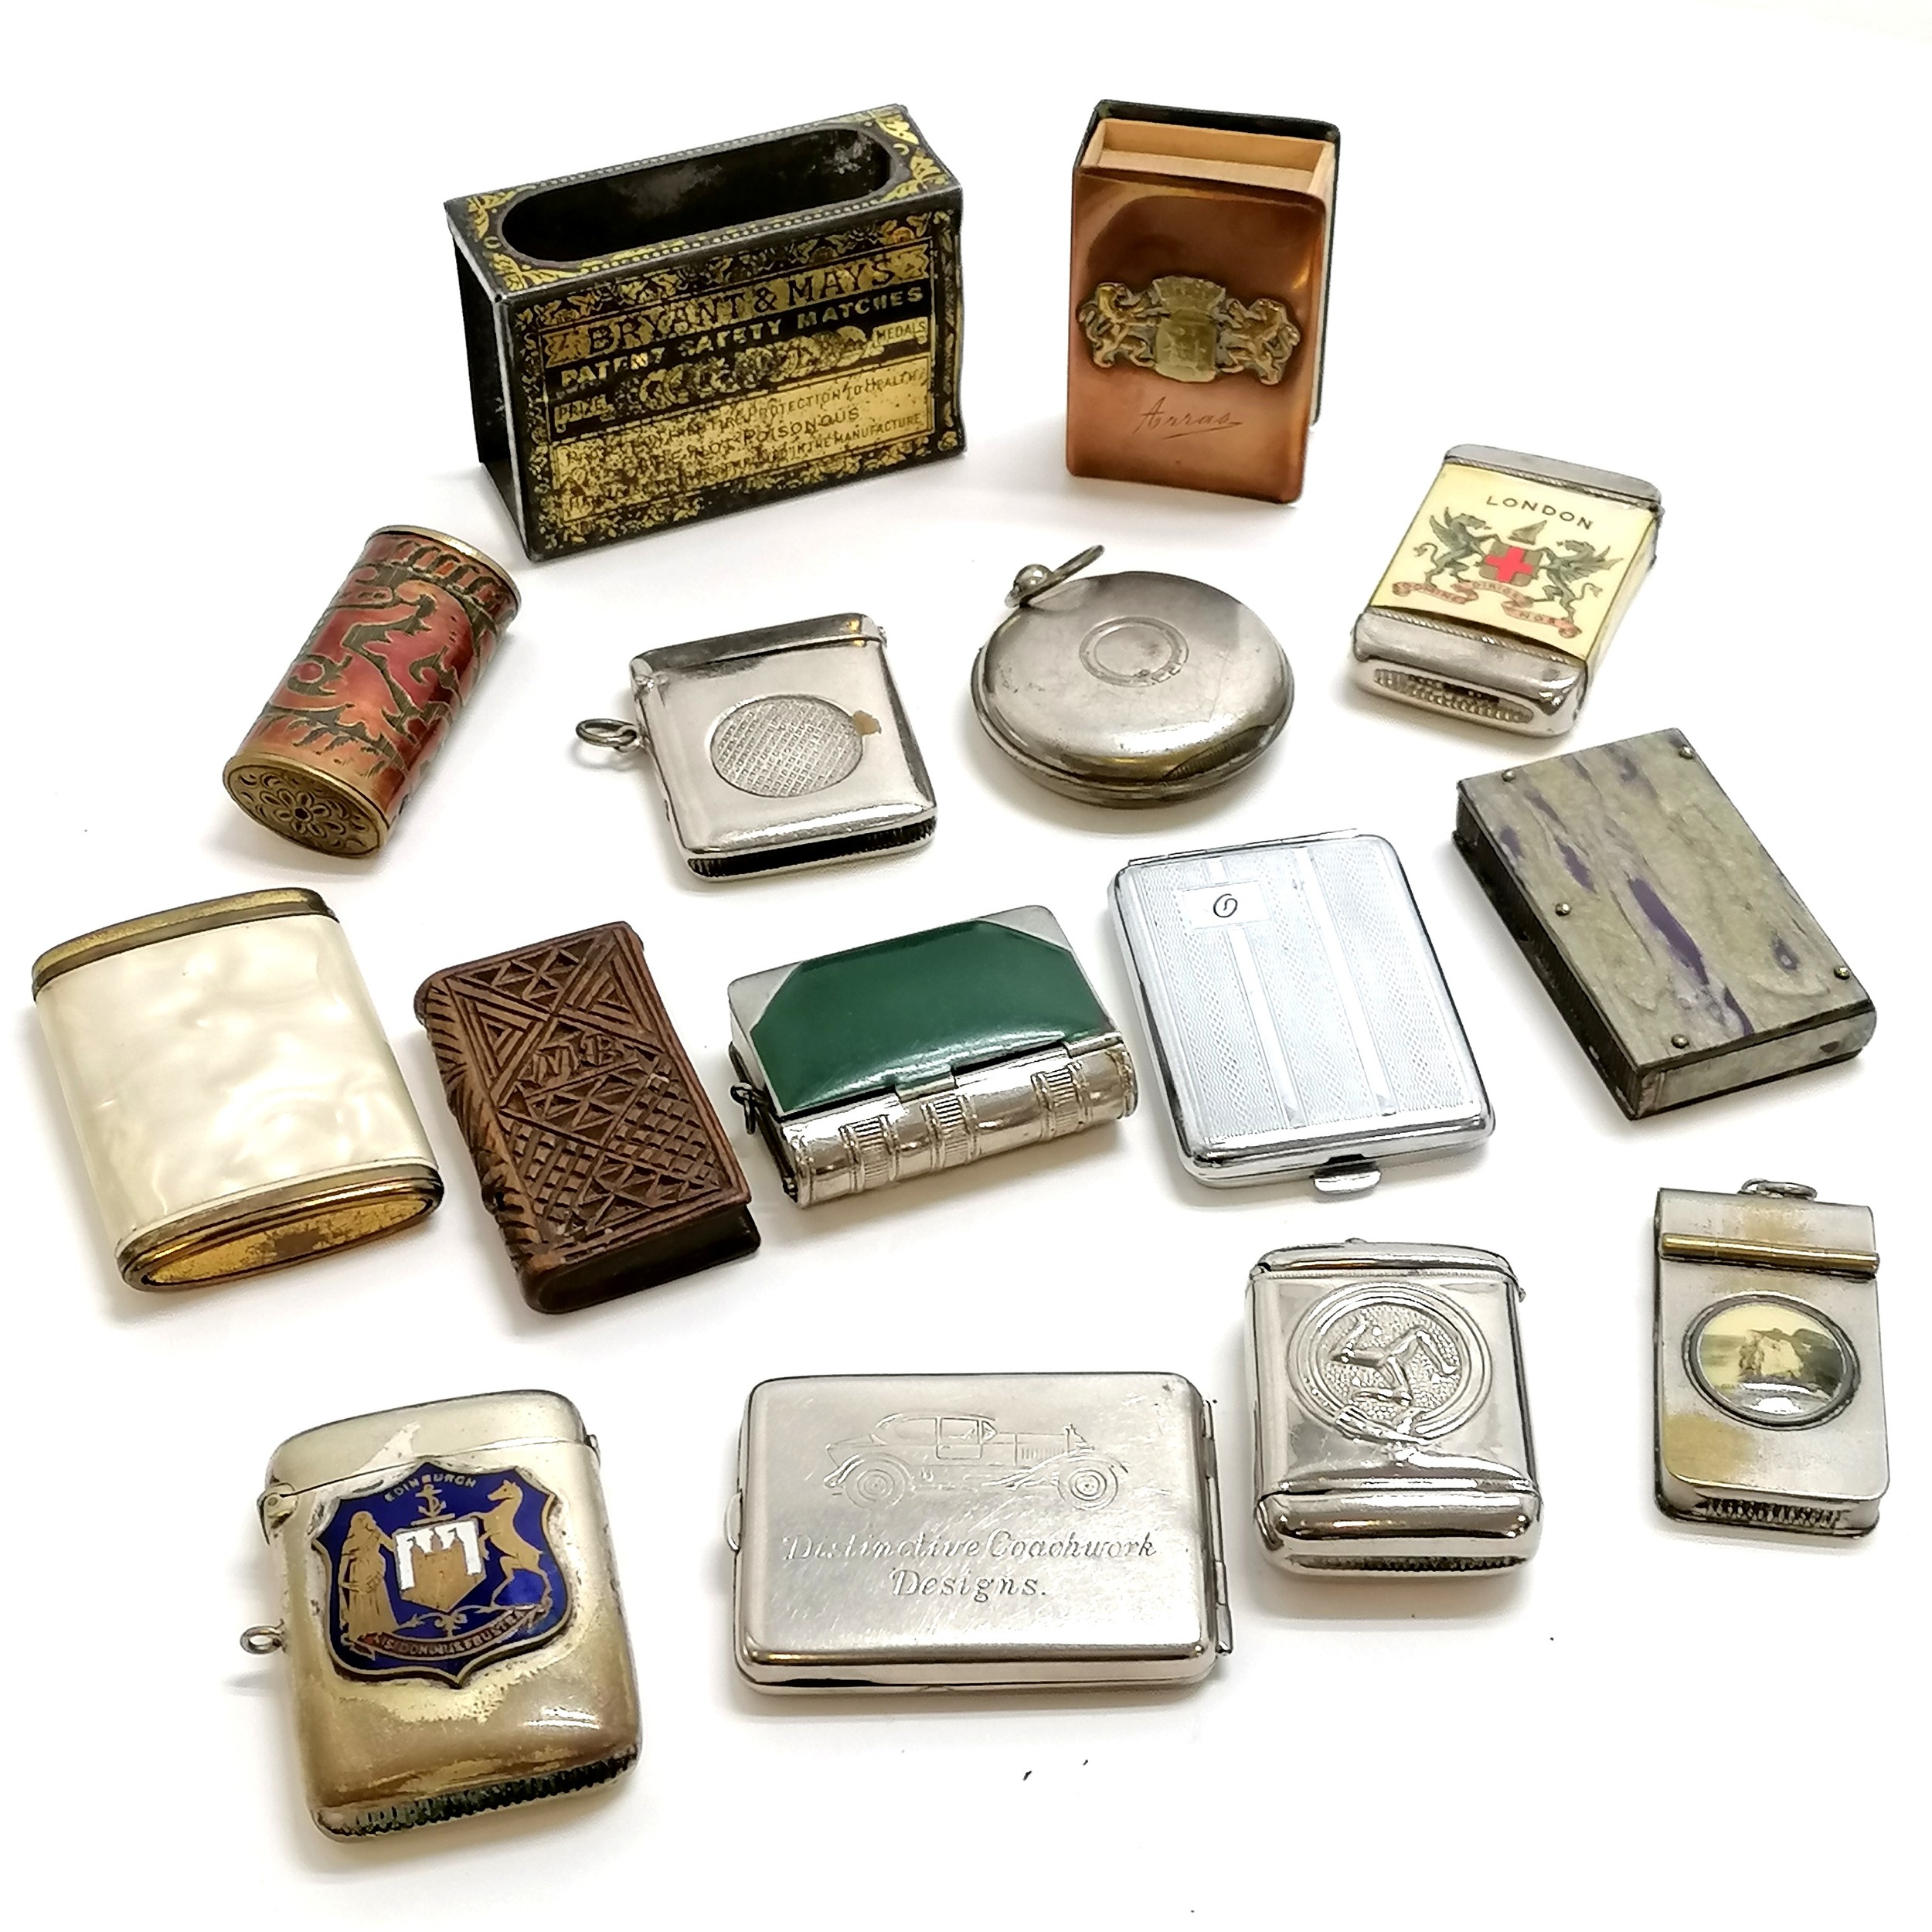 Quantity of novelty vestas & match box holders including metal Bryant & May's match box holder (